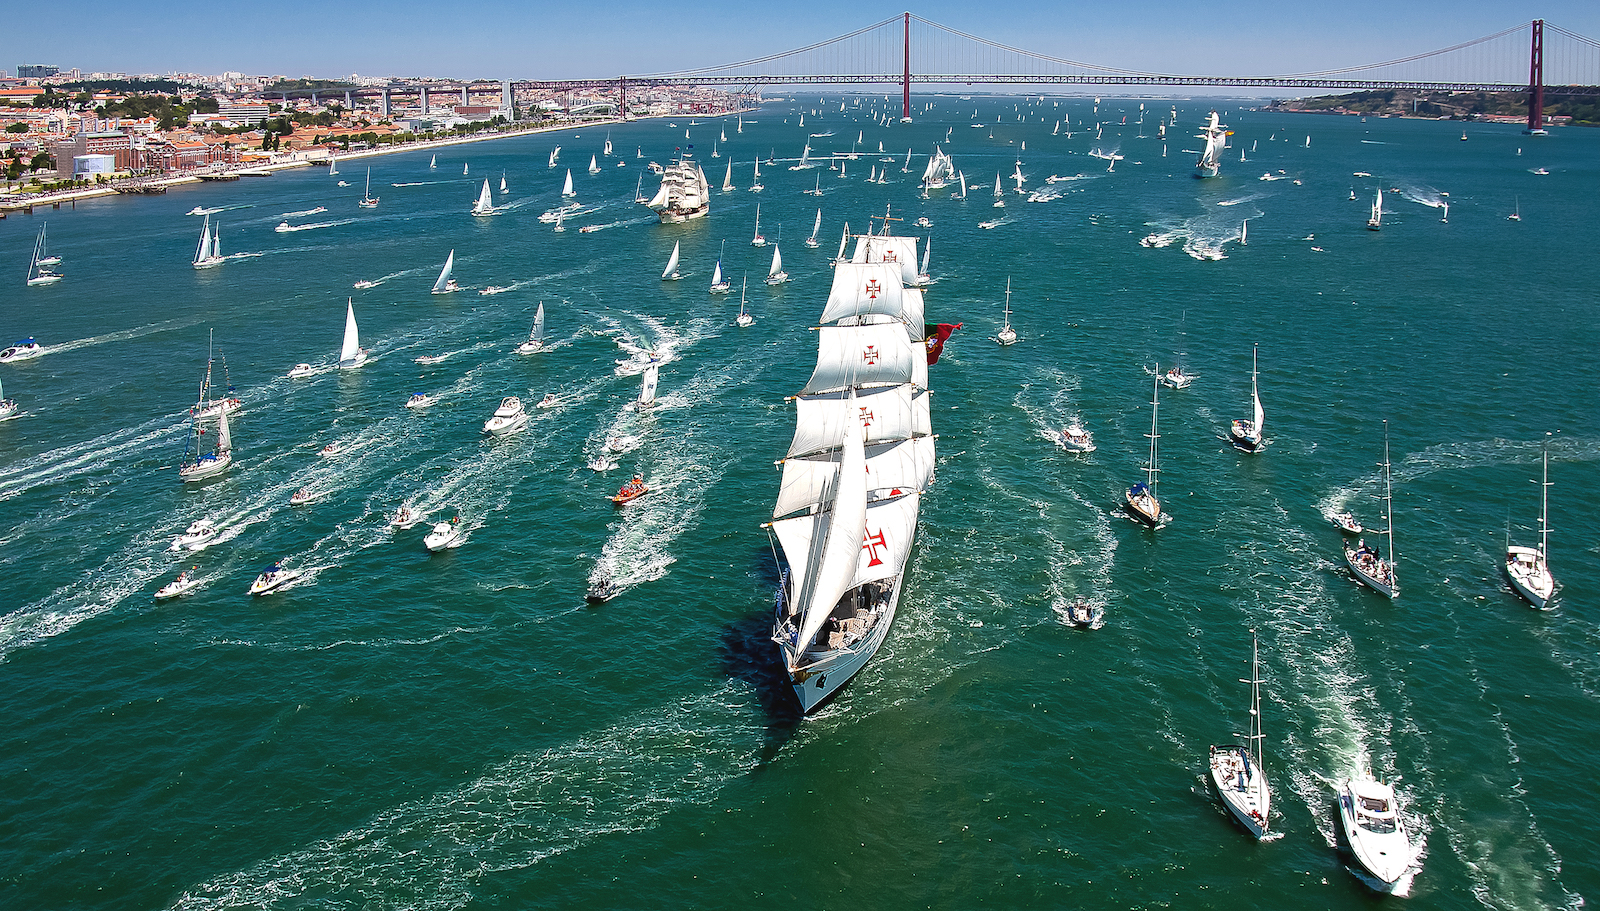 The Tall Ships Races in Portugal